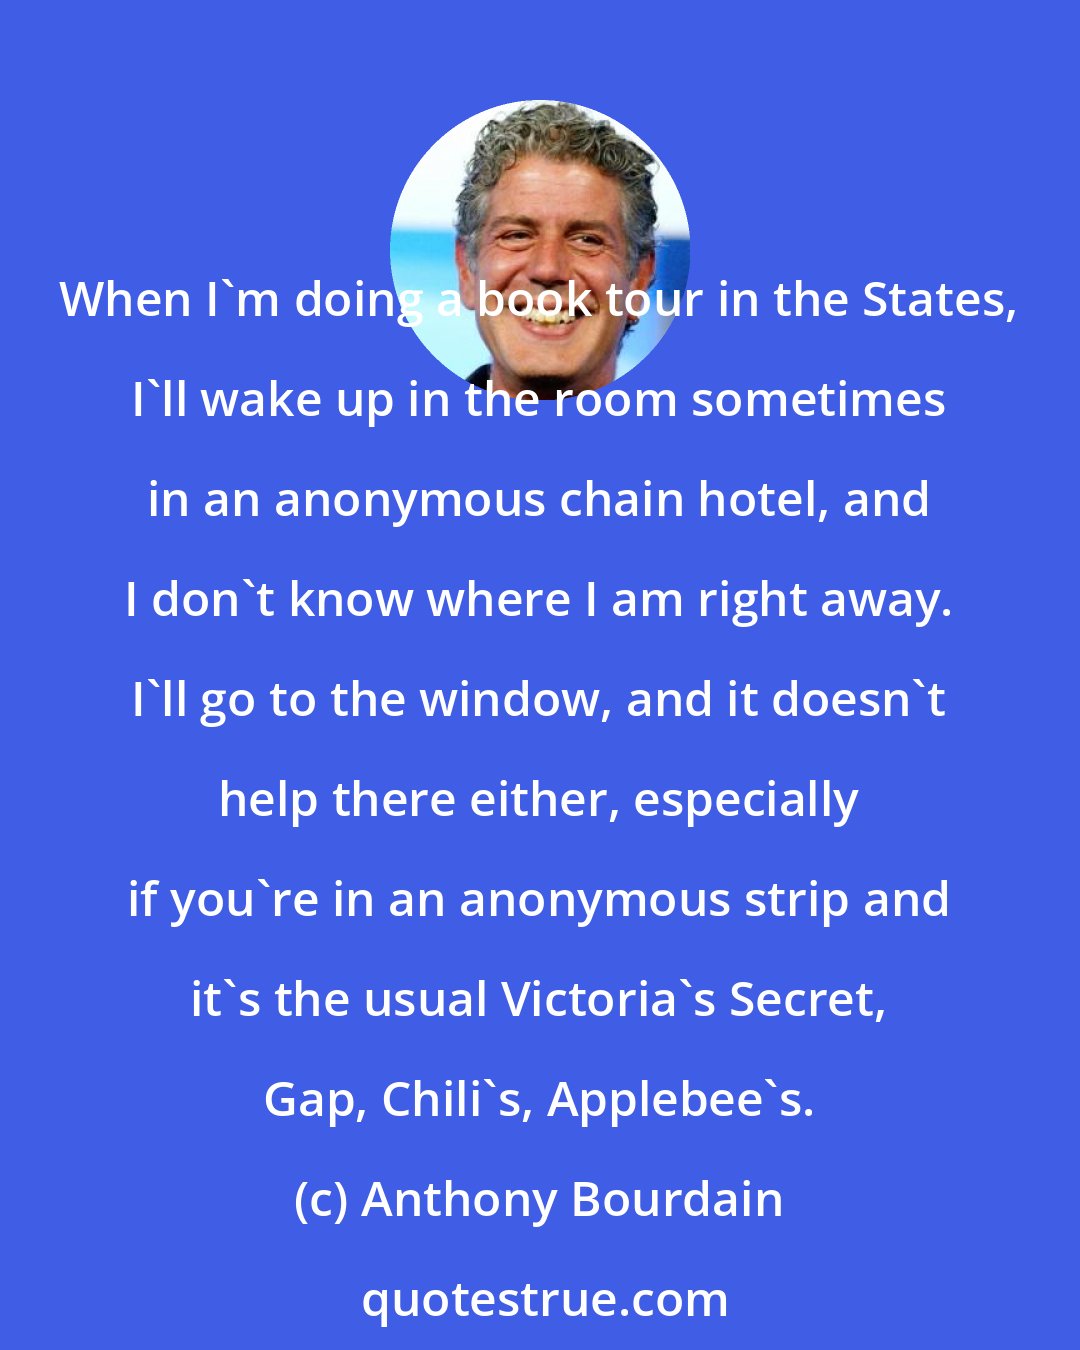 Anthony Bourdain: When I'm doing a book tour in the States, I'll wake up in the room sometimes in an anonymous chain hotel, and I don't know where I am right away. I'll go to the window, and it doesn't help there either, especially if you're in an anonymous strip and it's the usual Victoria's Secret, Gap, Chili's, Applebee's.